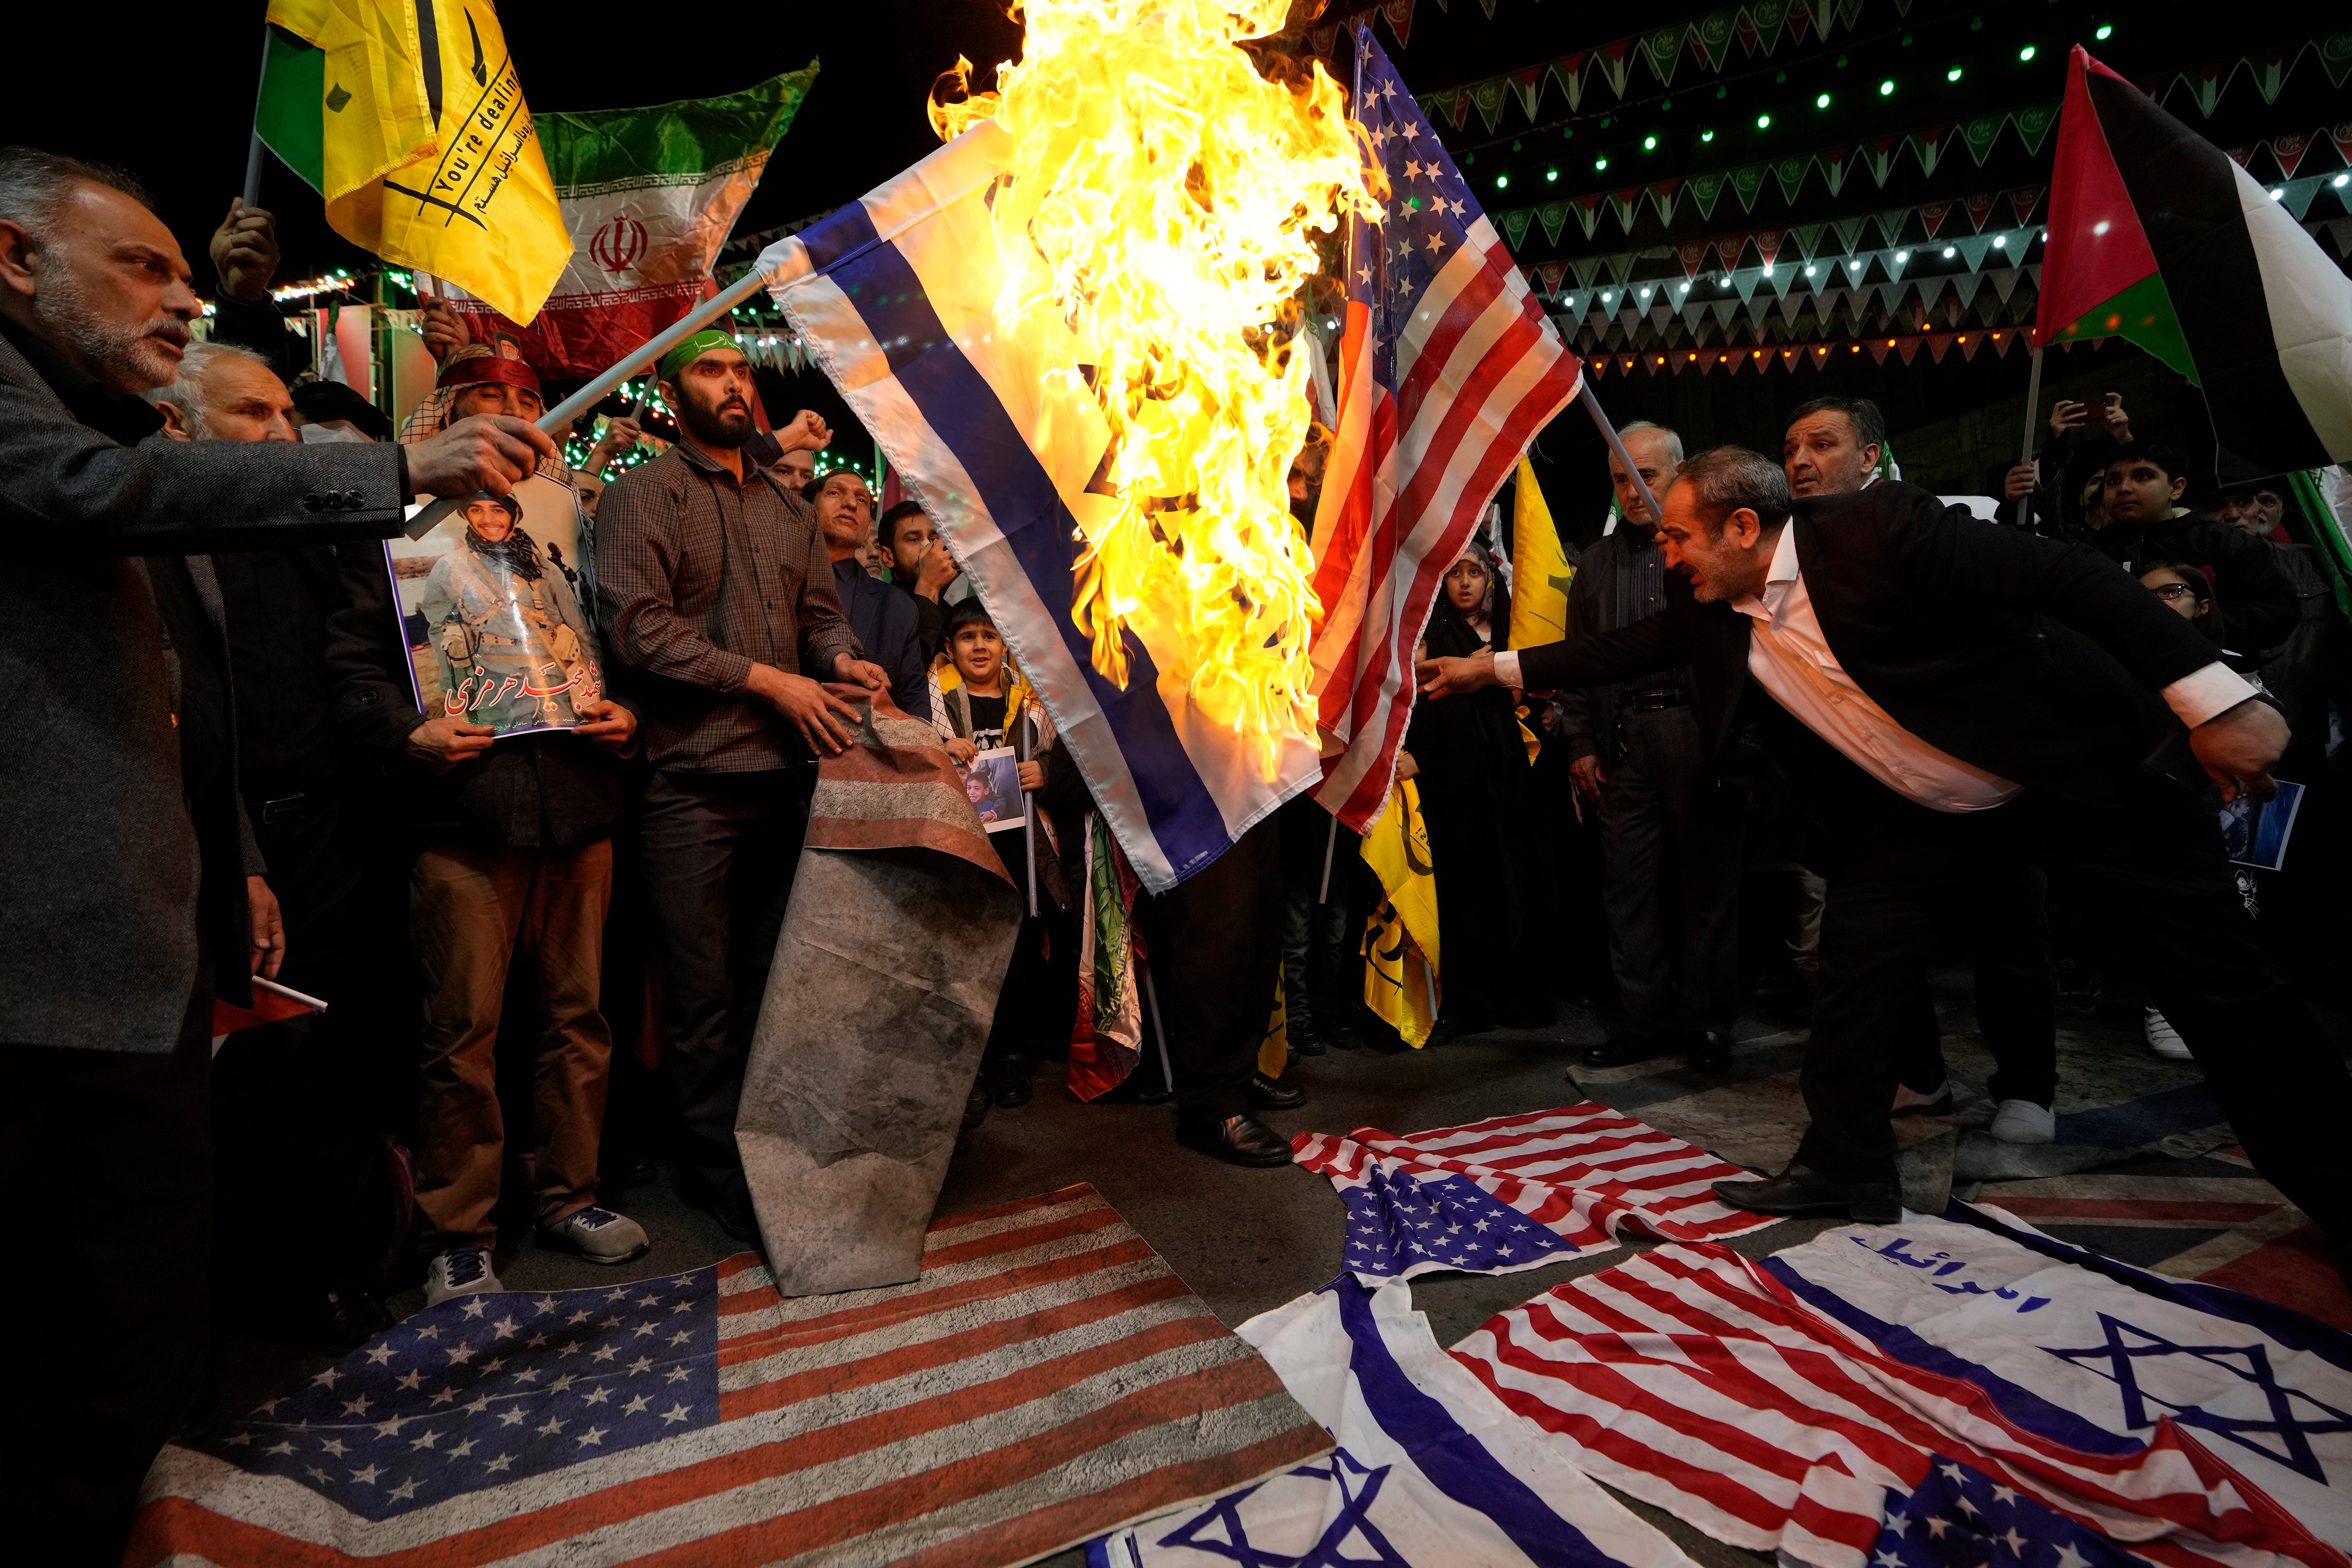 Iranian protesters burn US and Israeli flags after an airstrike on Tehran’s consulate in Syria